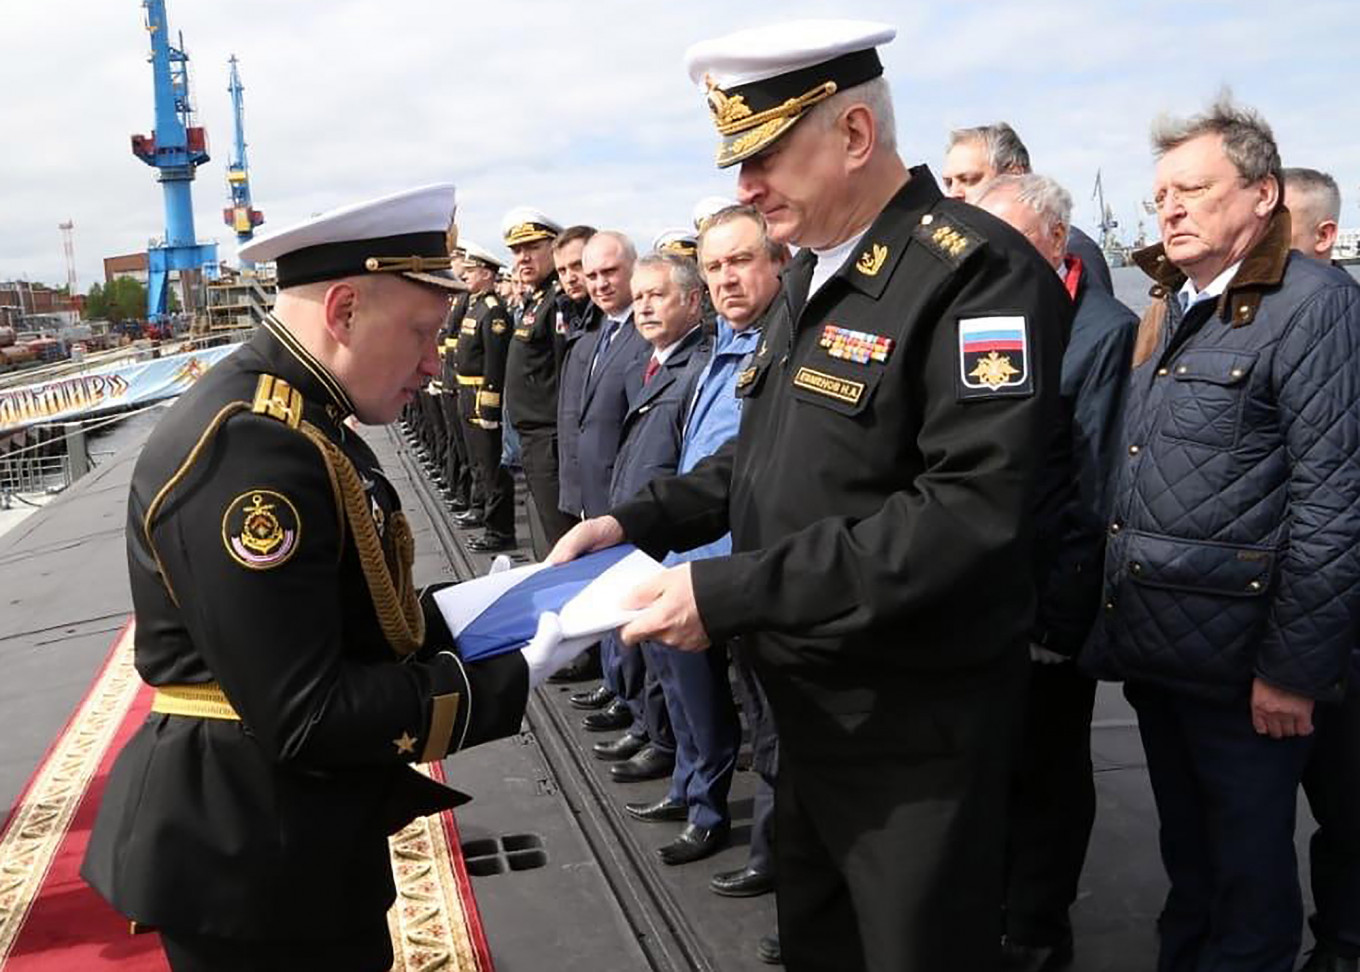 Naval Chiefs at Russian Submarine Ceremony Ignore Coronavirus Safety Rules